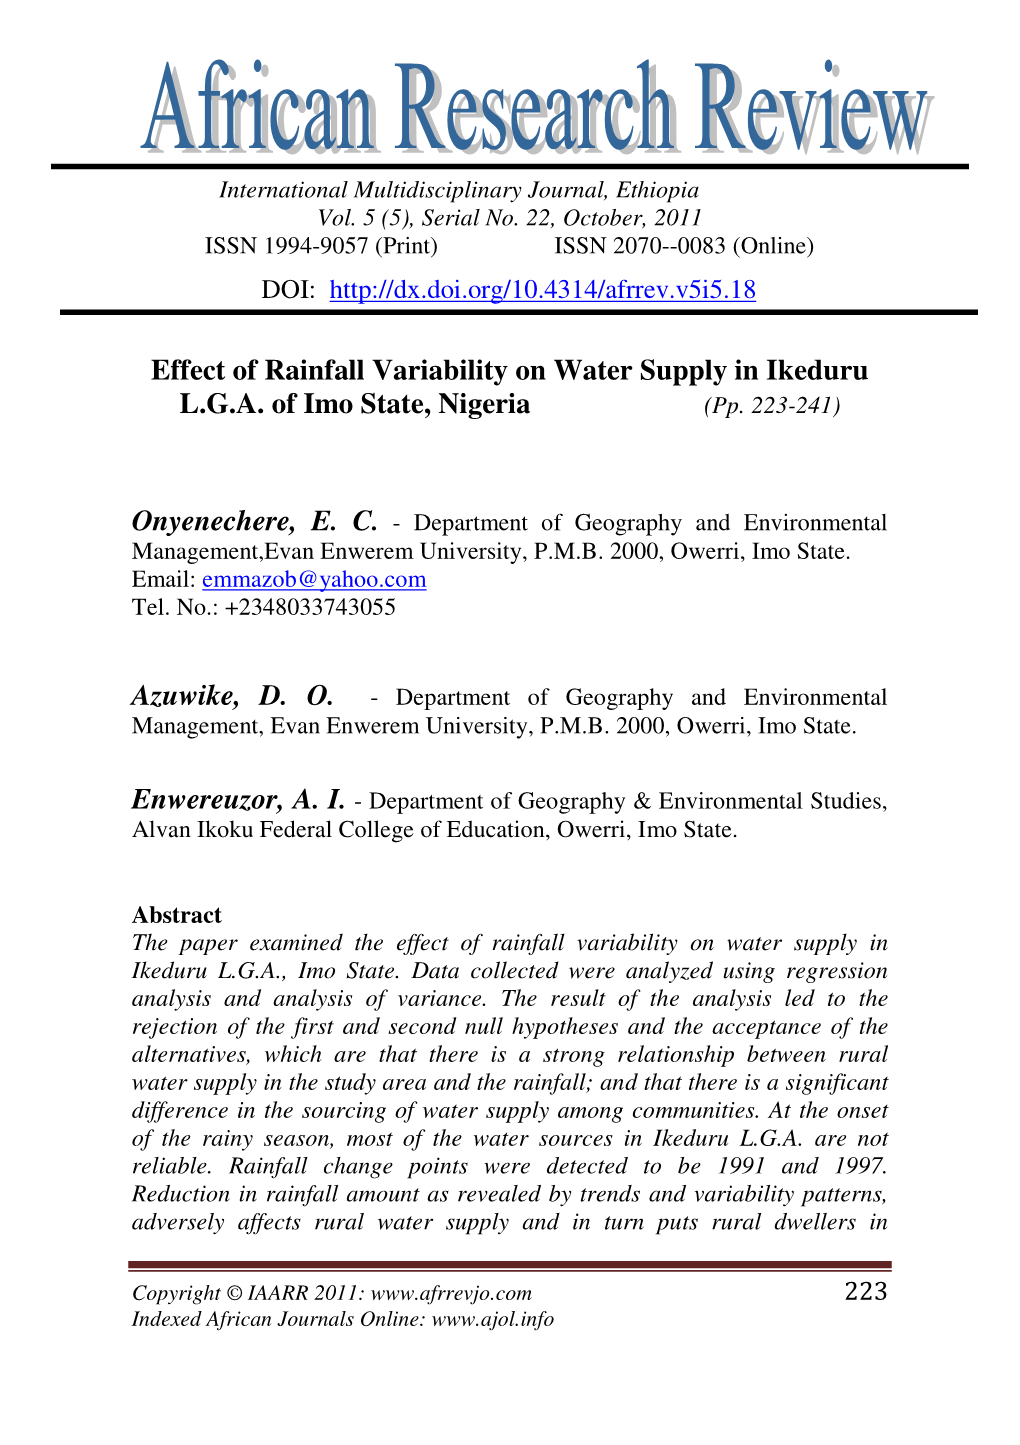 Effect of Rainfall Variability on Water Supply in Ikeduru L.G.A. of Imo State, Nigeria (Pp